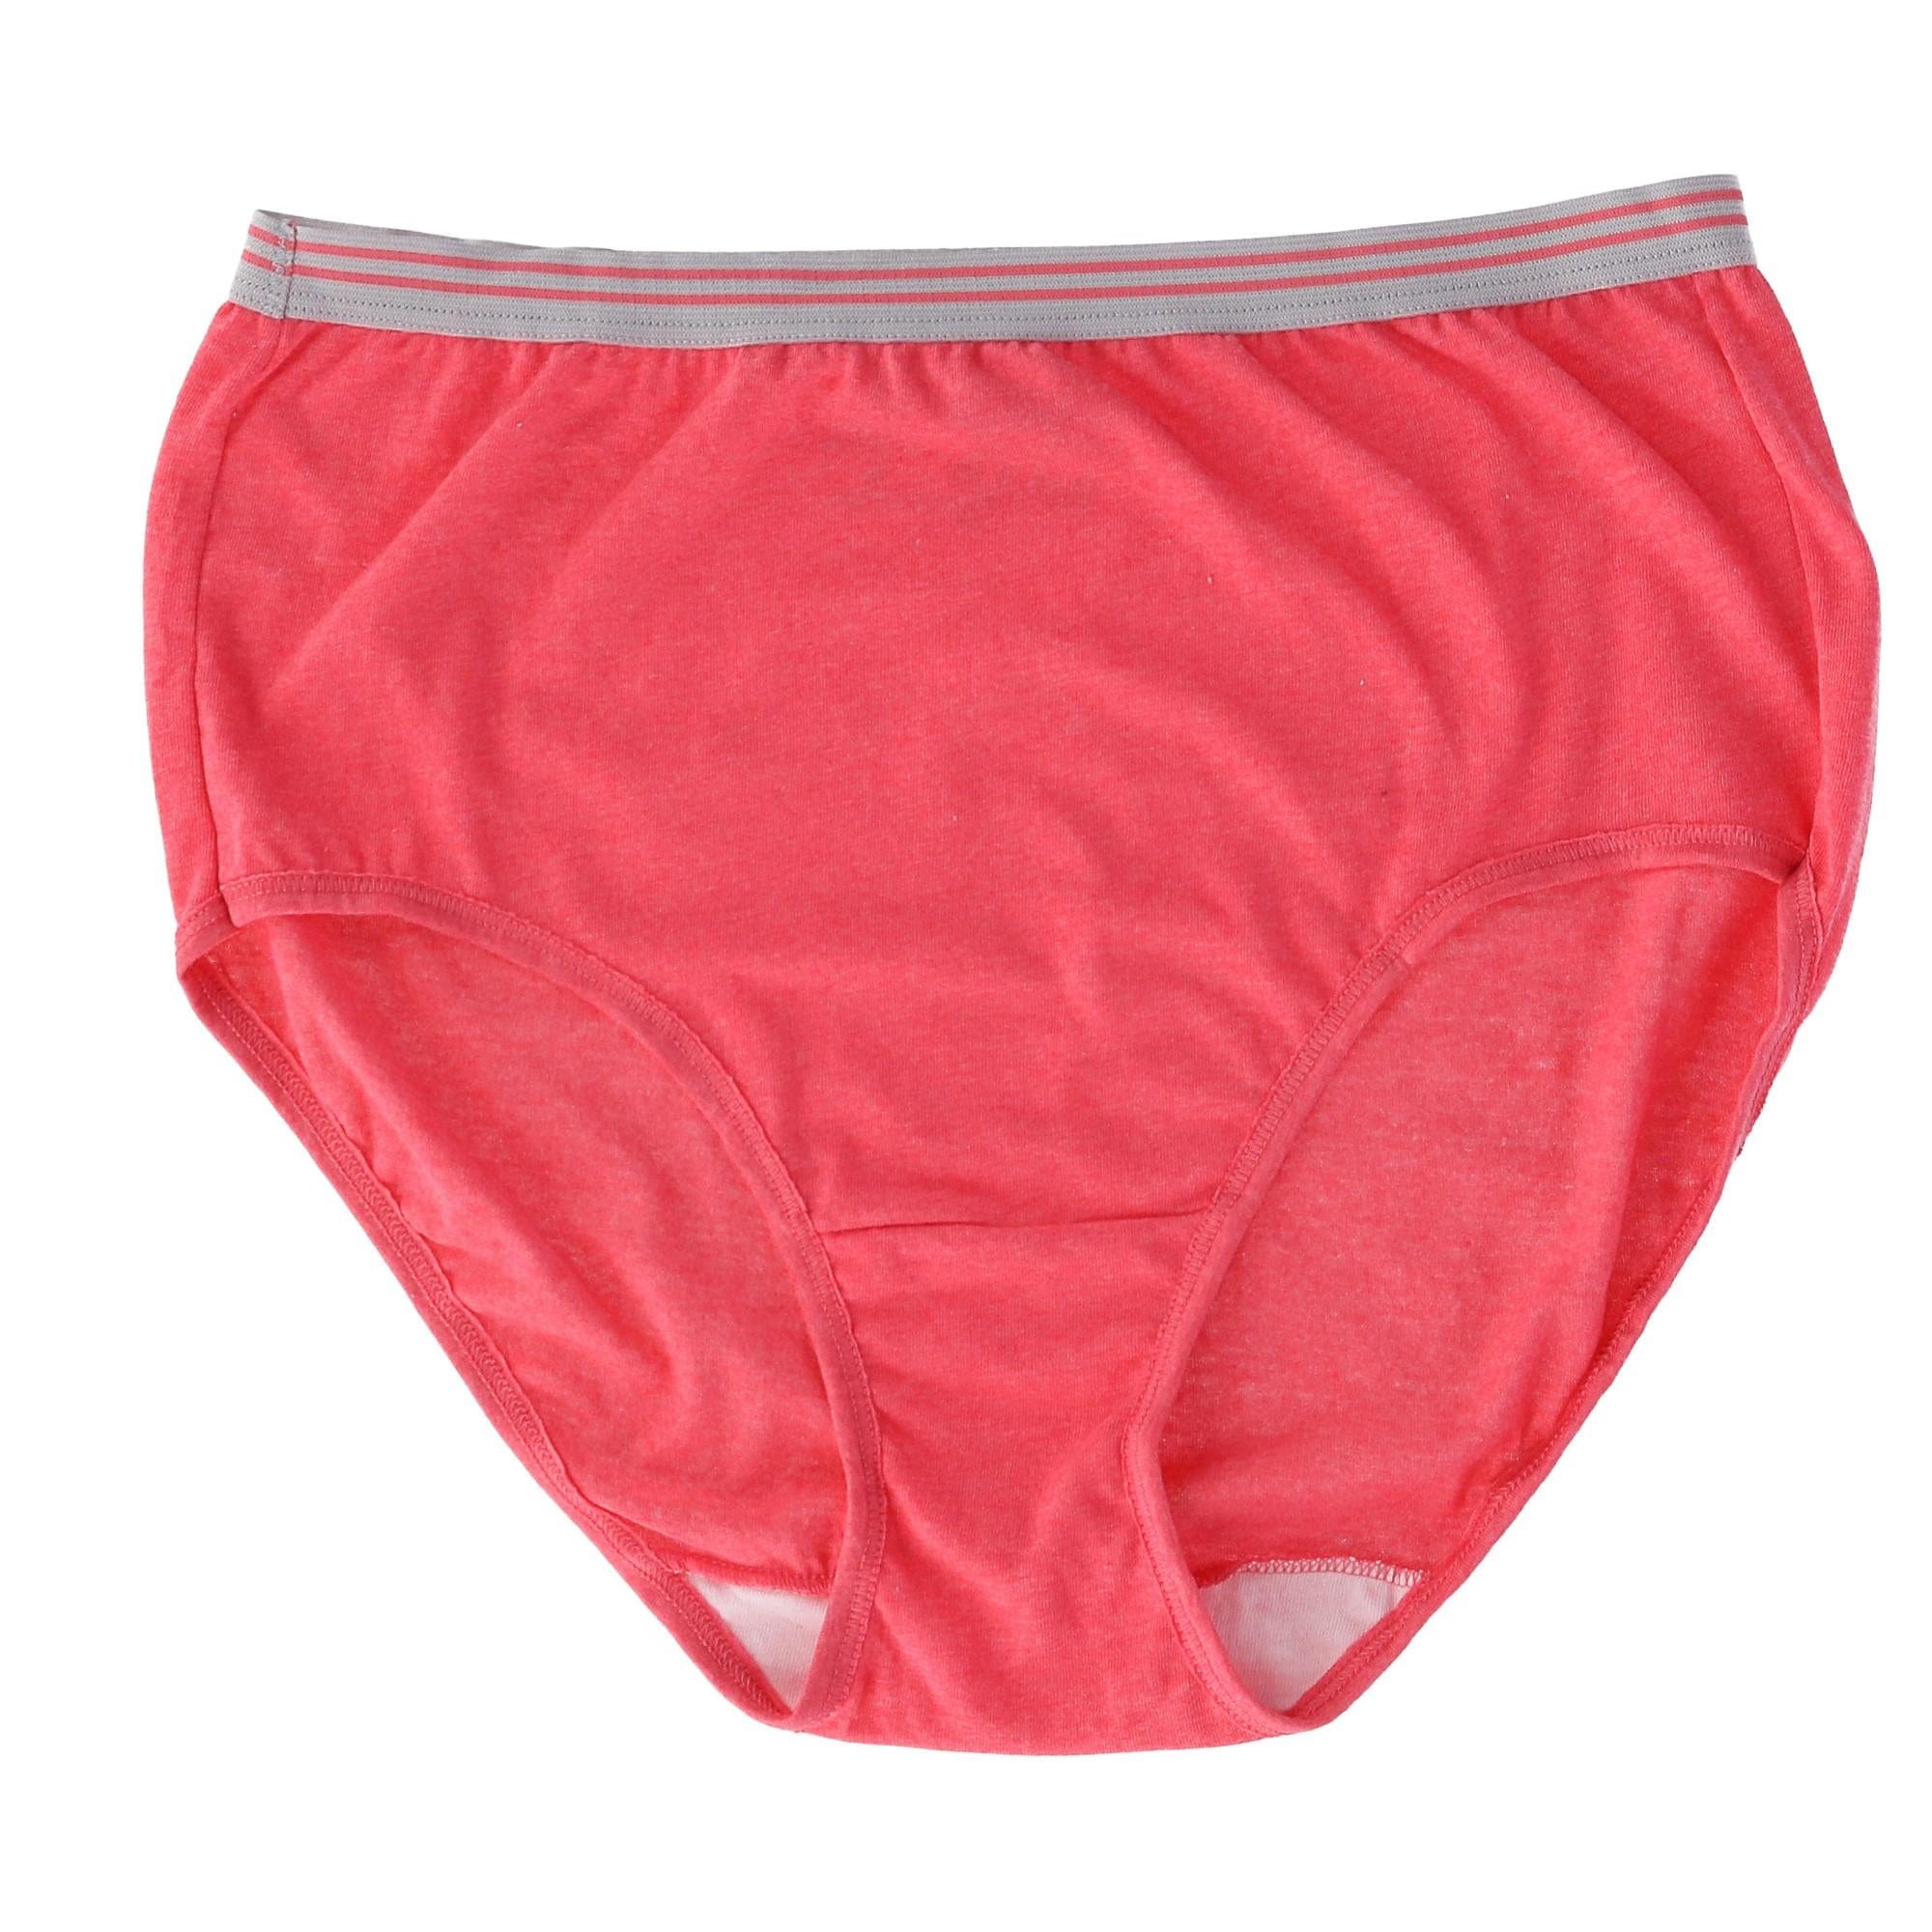 Women's Heather Brief Panty, Assorted 6 Pack